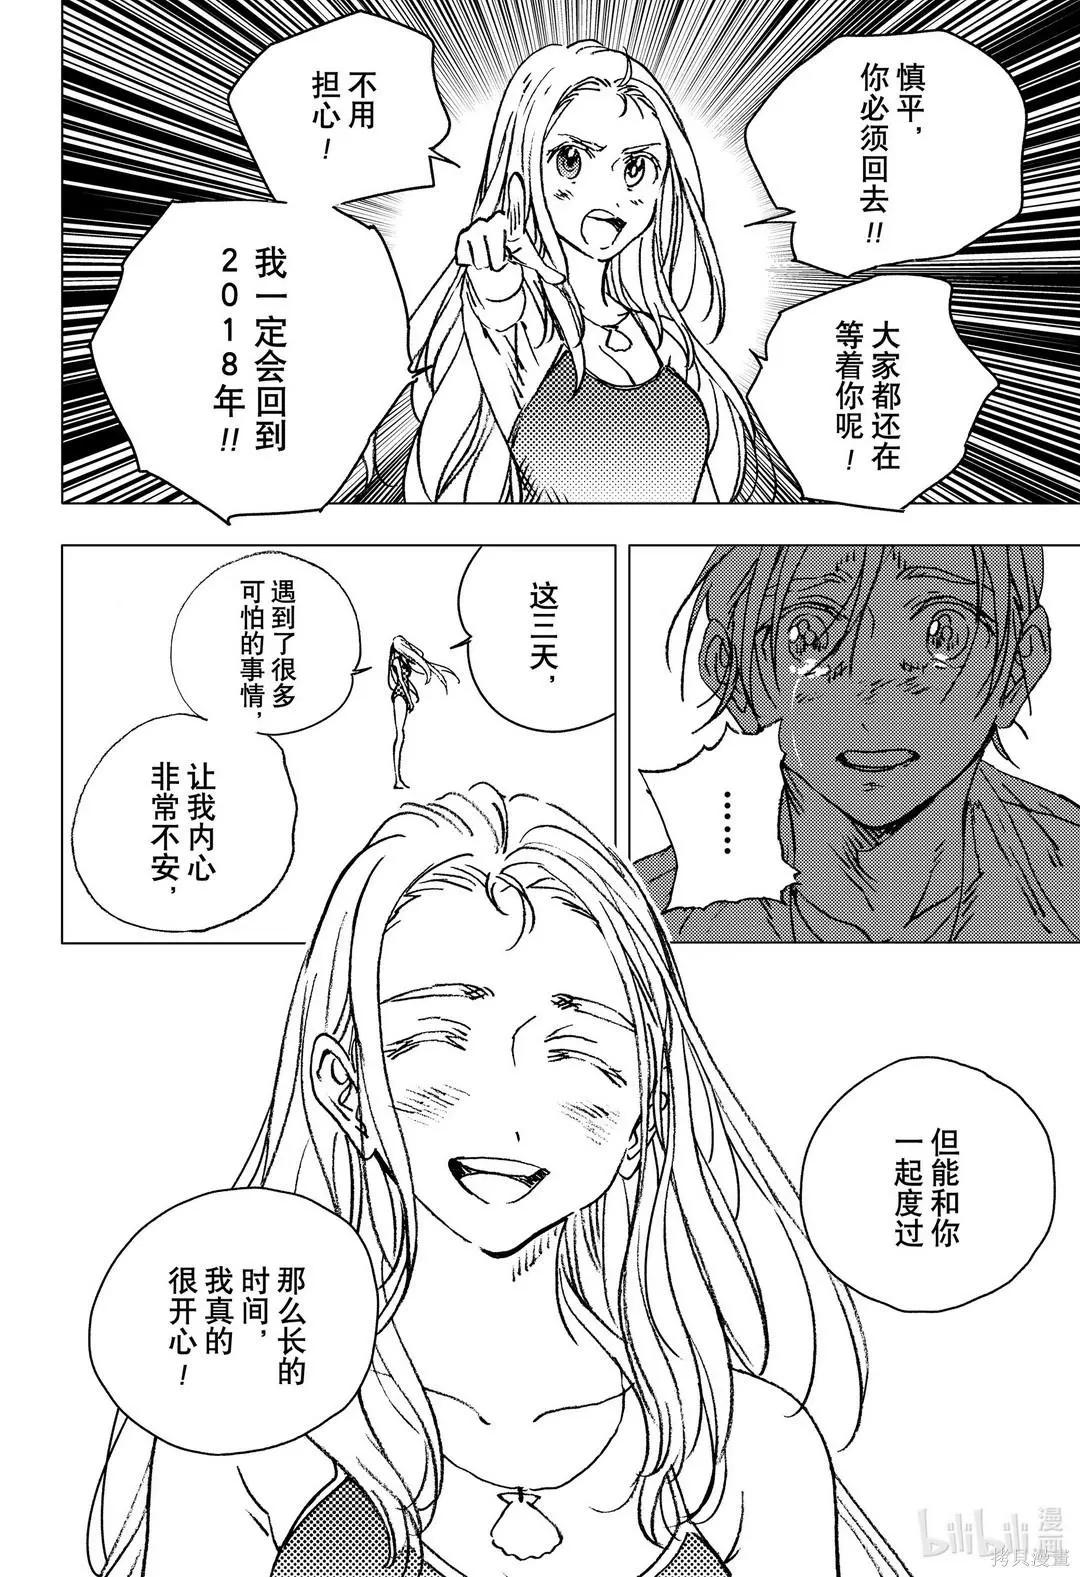 Summer time rendering - 第138話 - 7